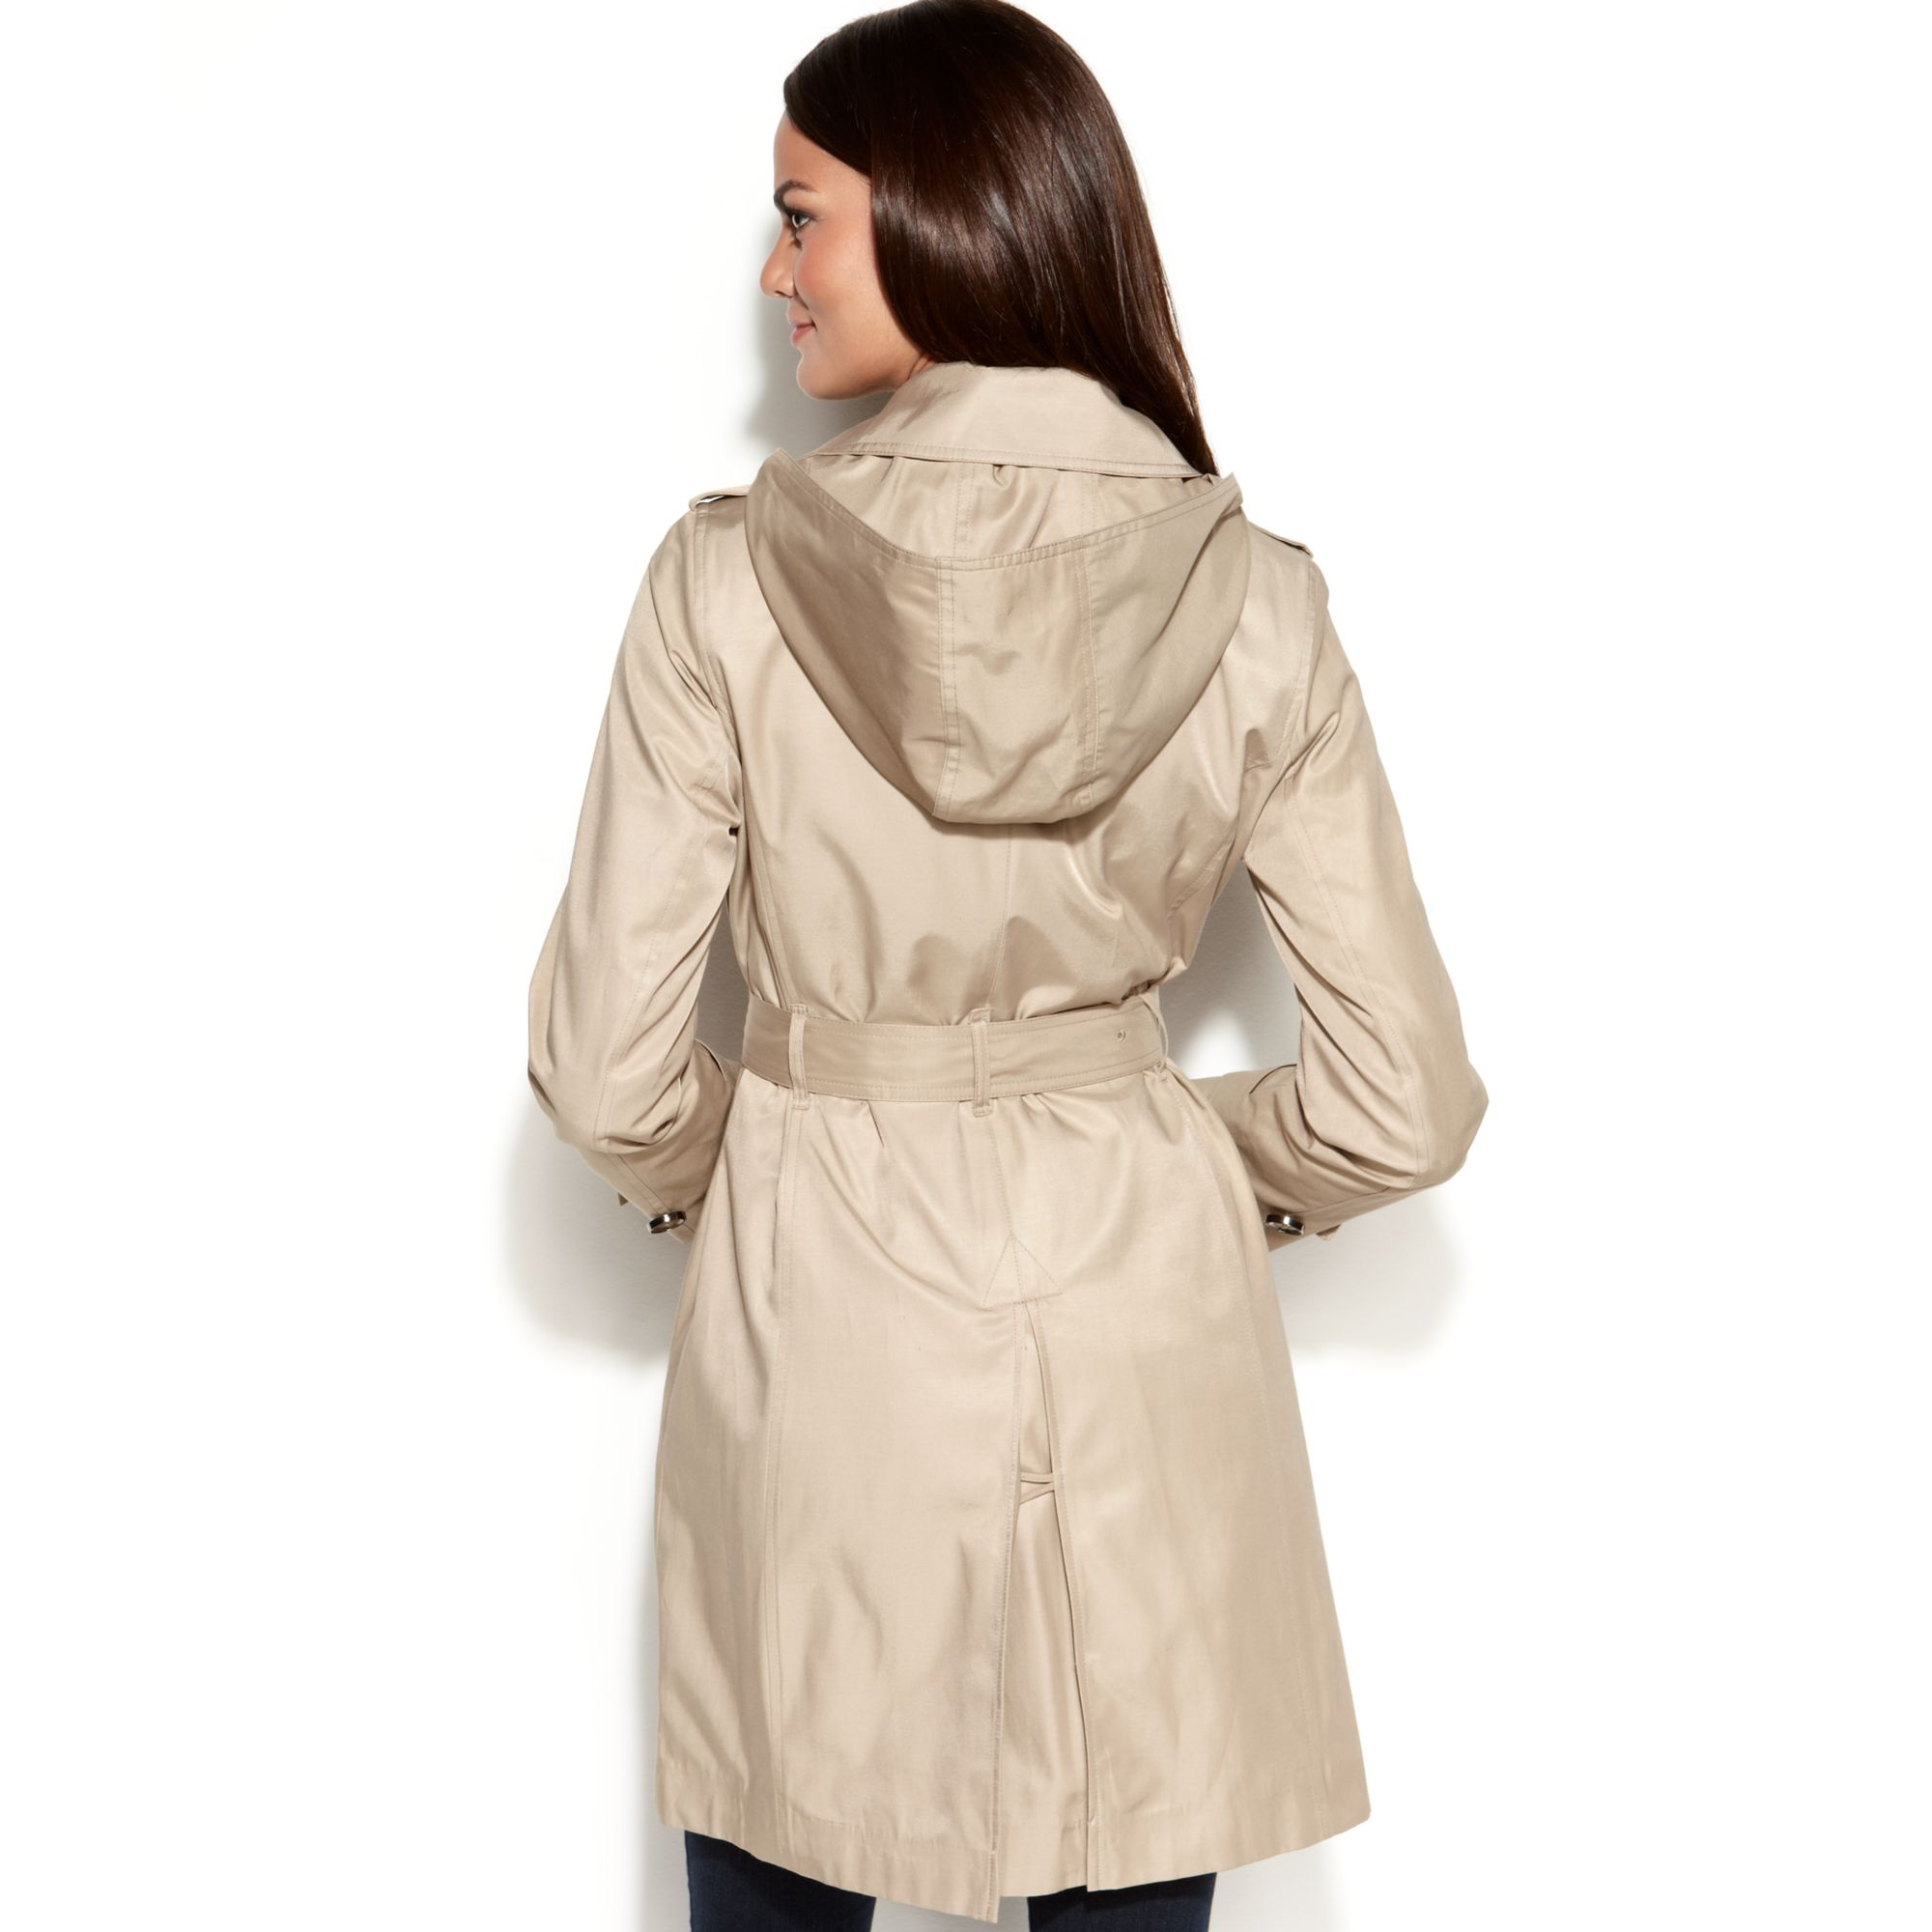 London fog Allweather Hooded Trench Coat in Natural (Khaki) | Lyst